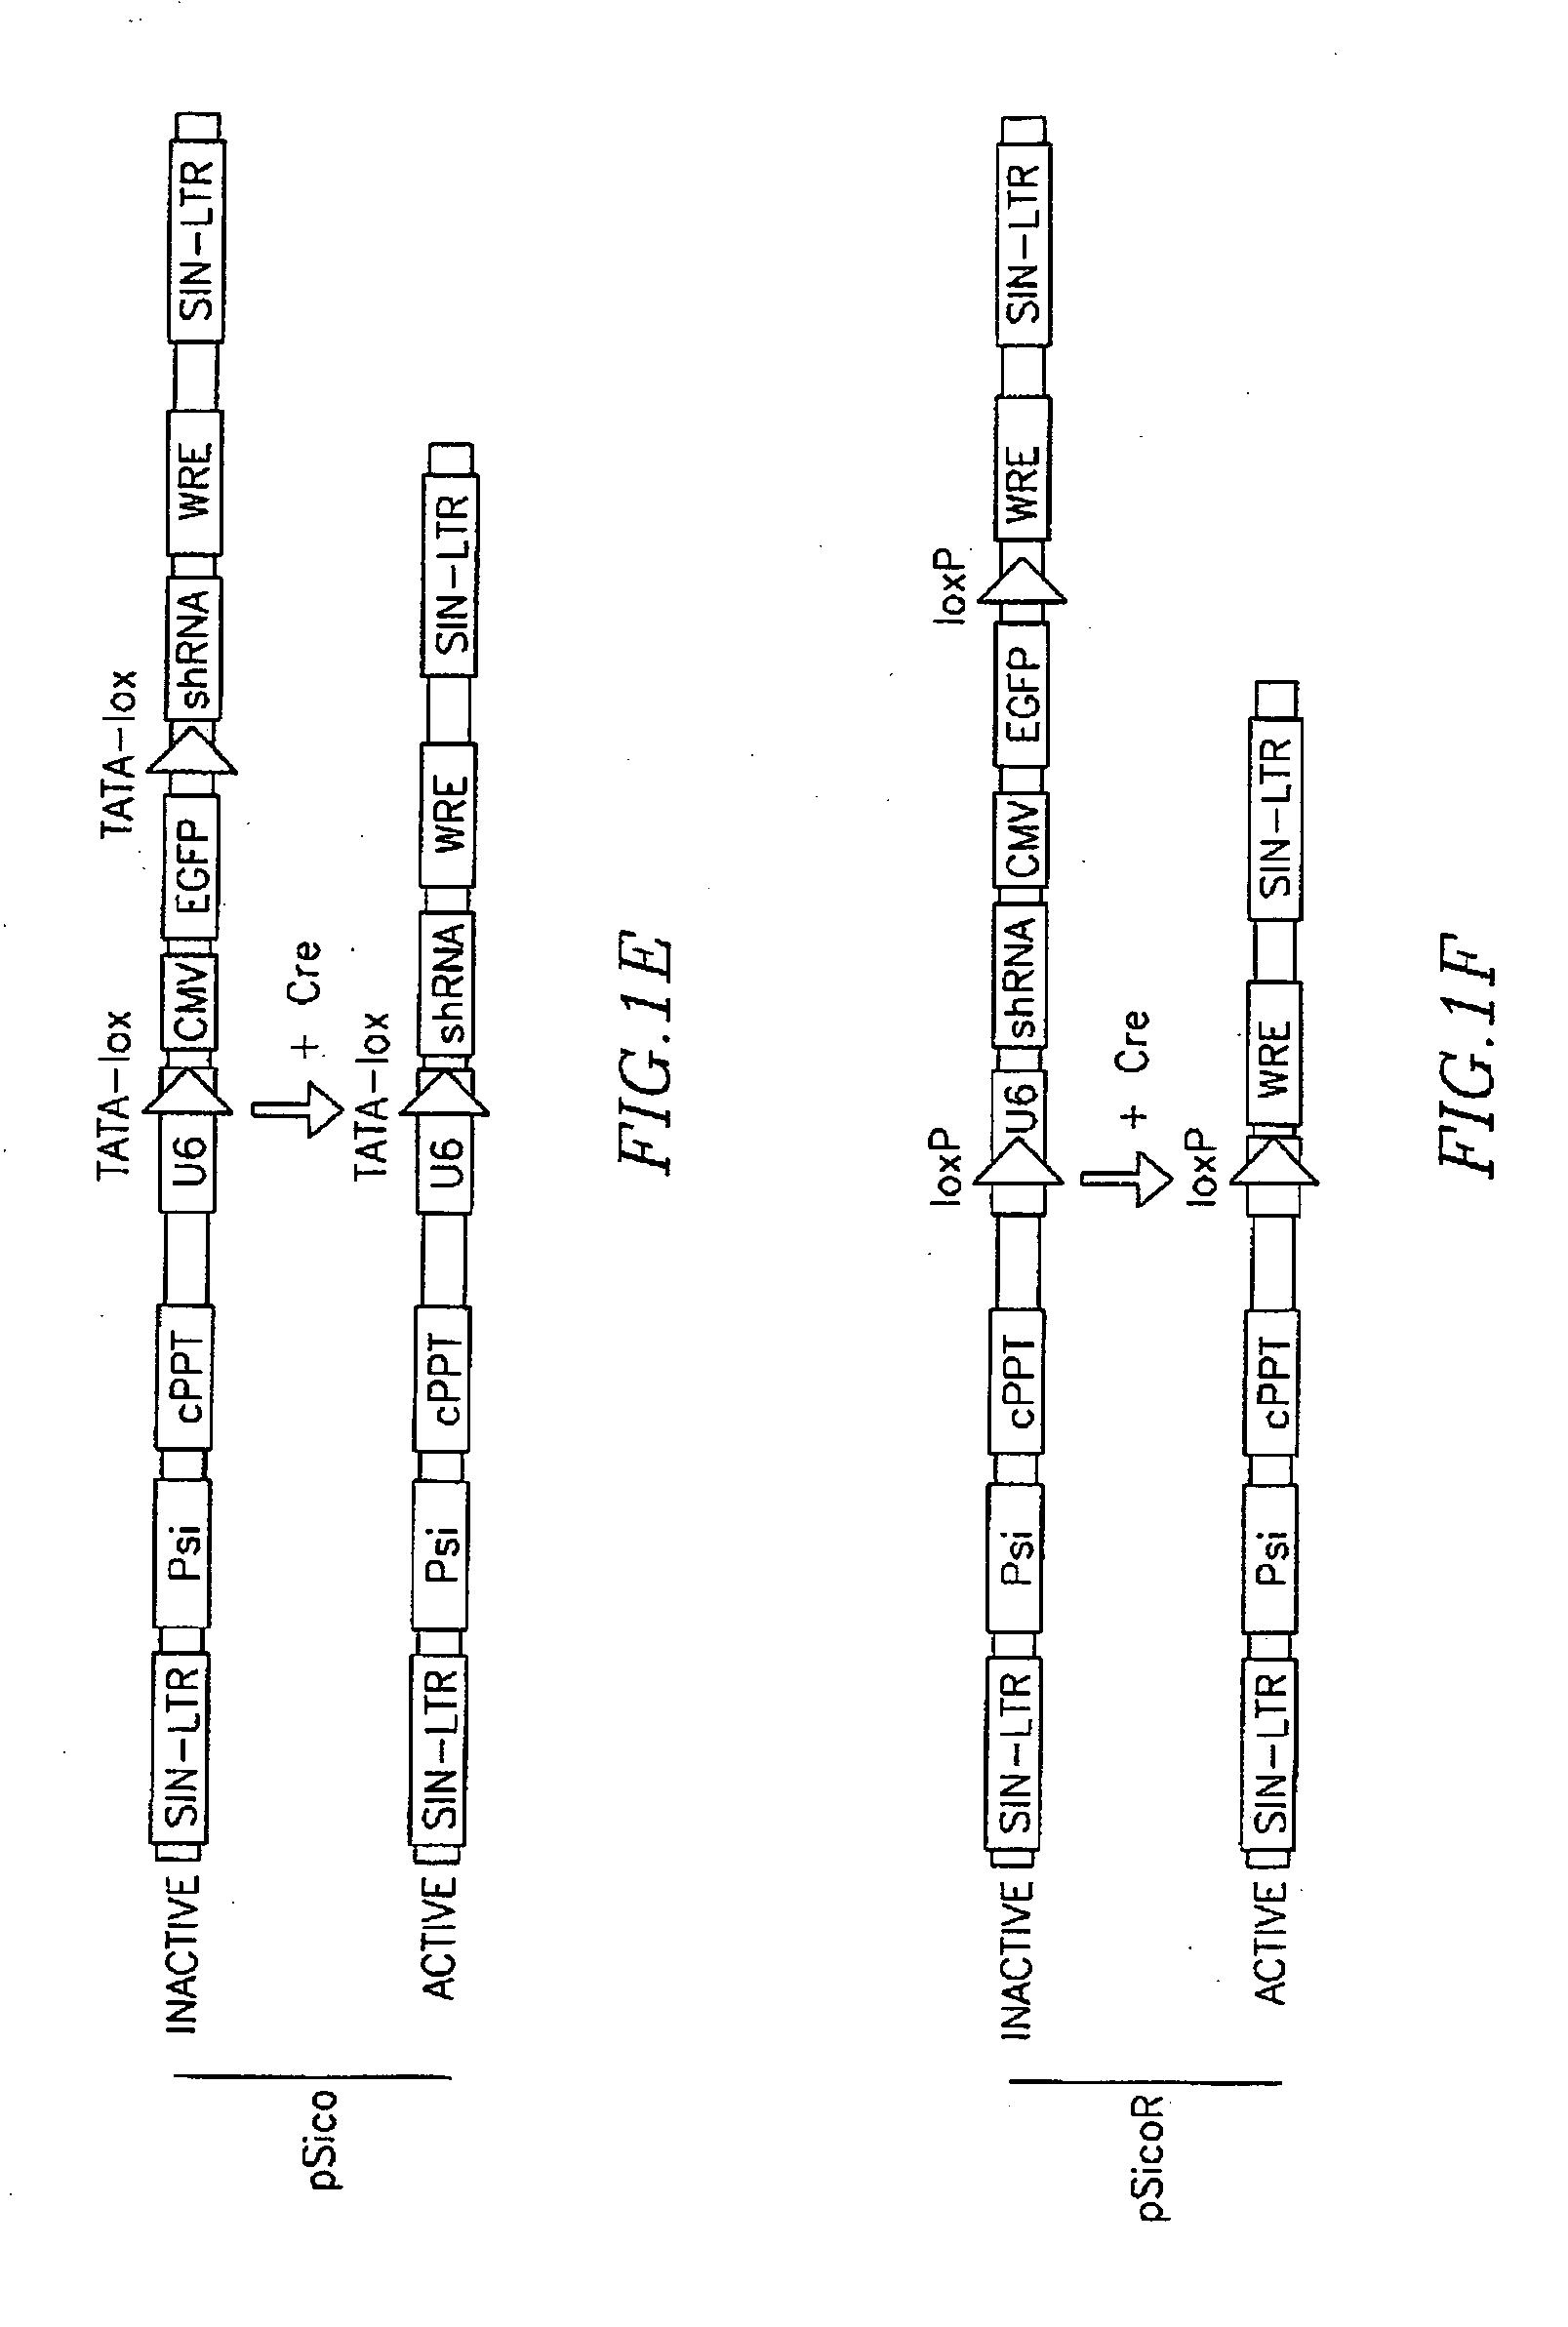 Cre-lox based method for conditional RNA interference